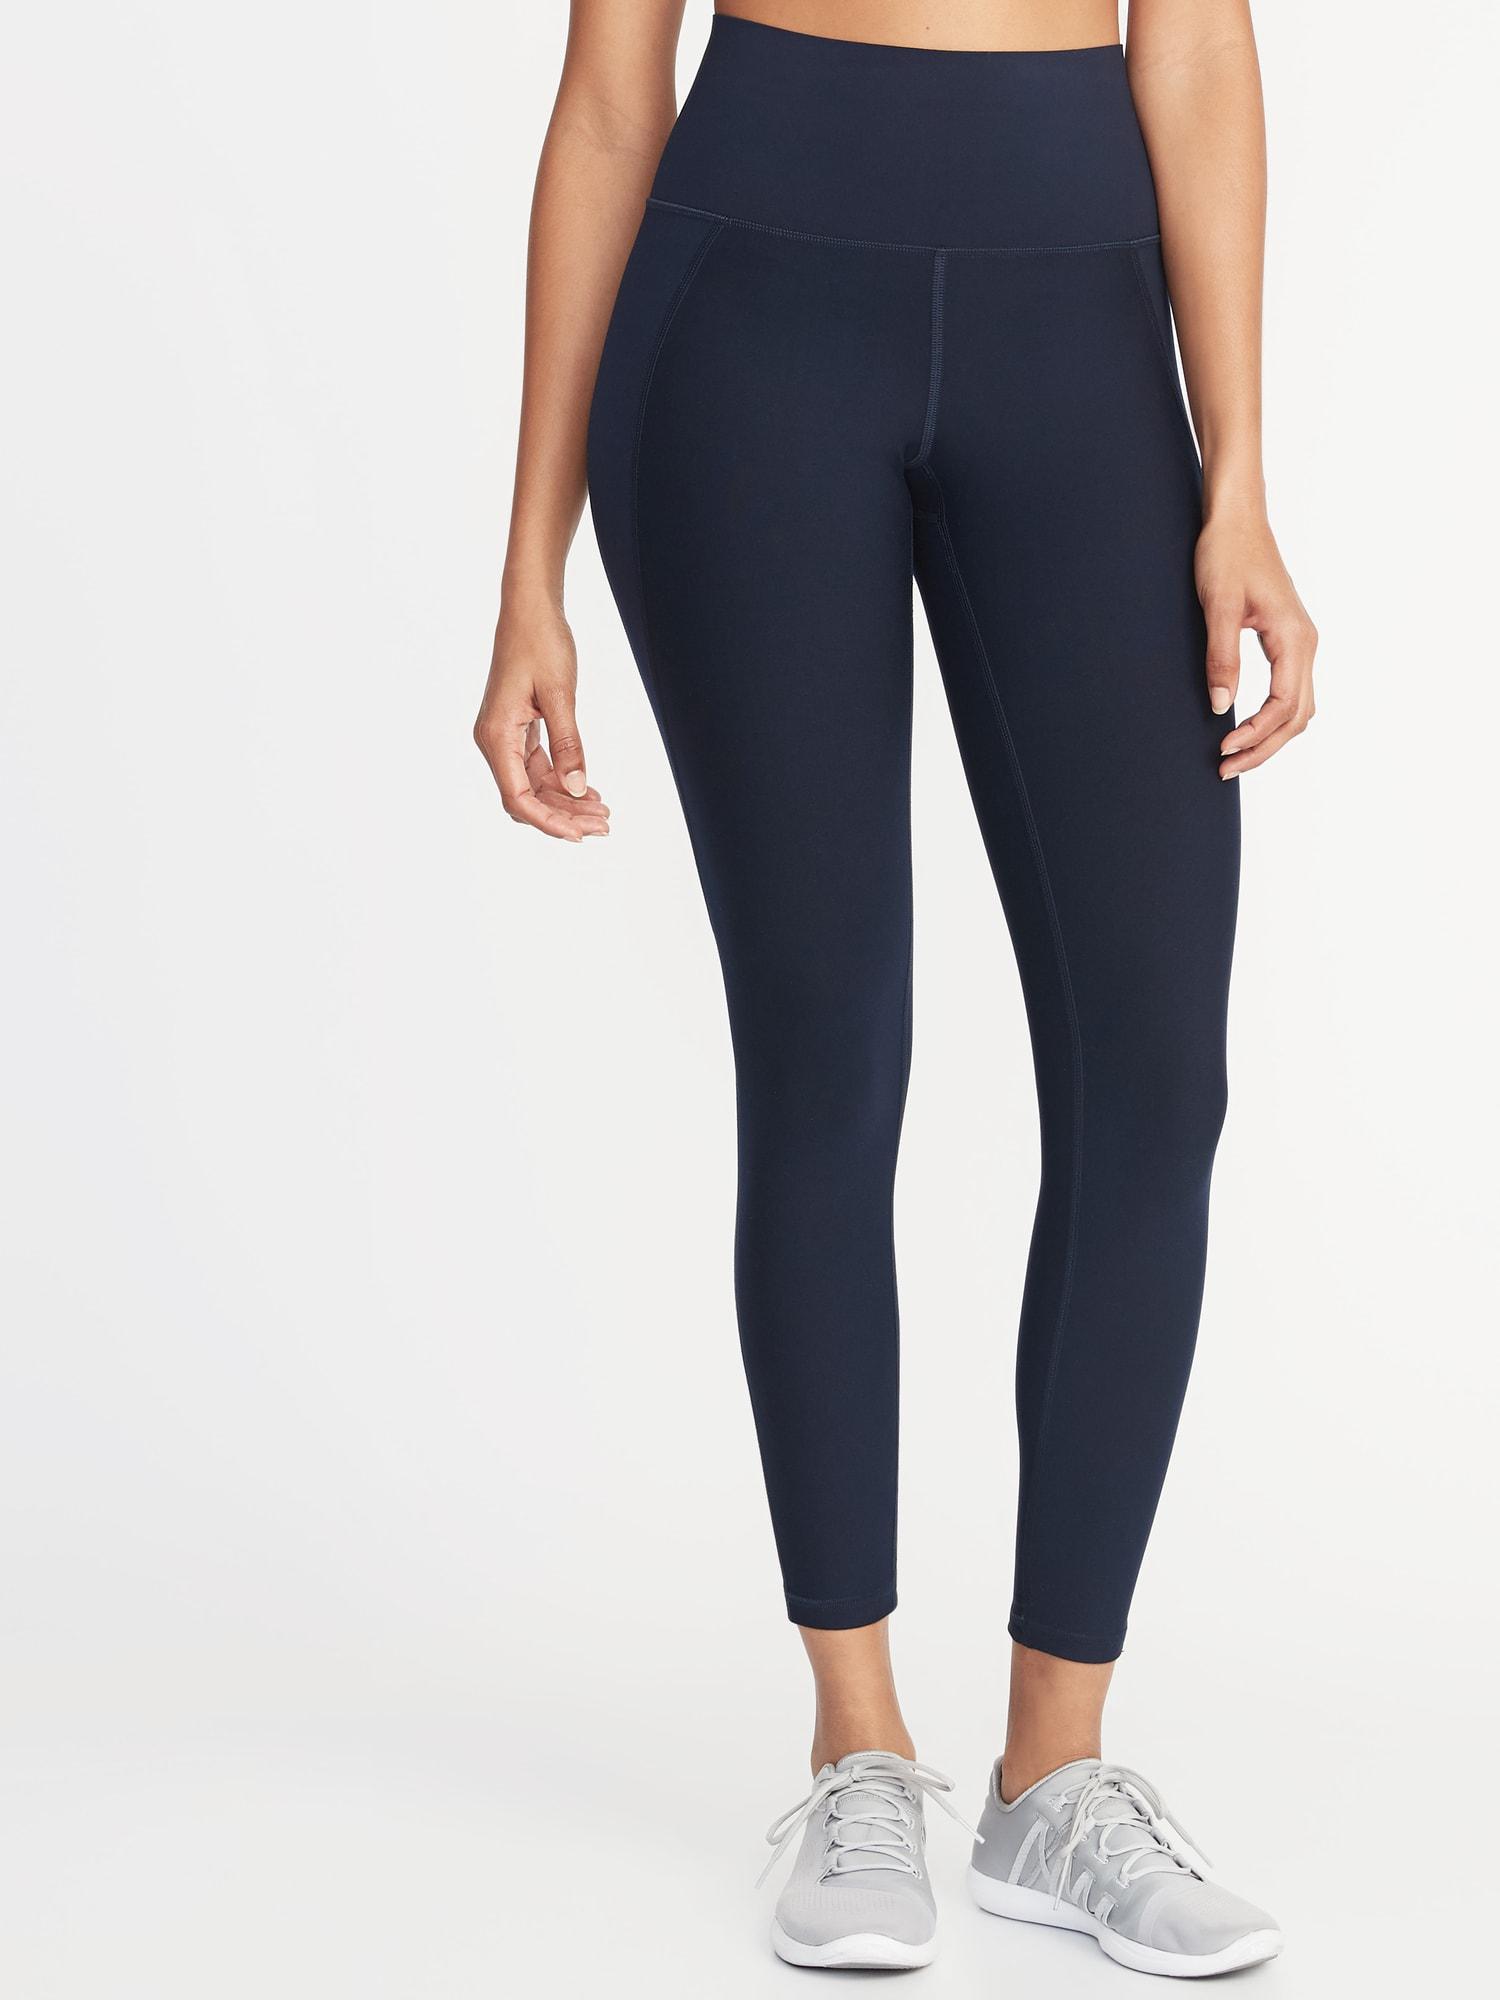 types of old navy leggings for sale